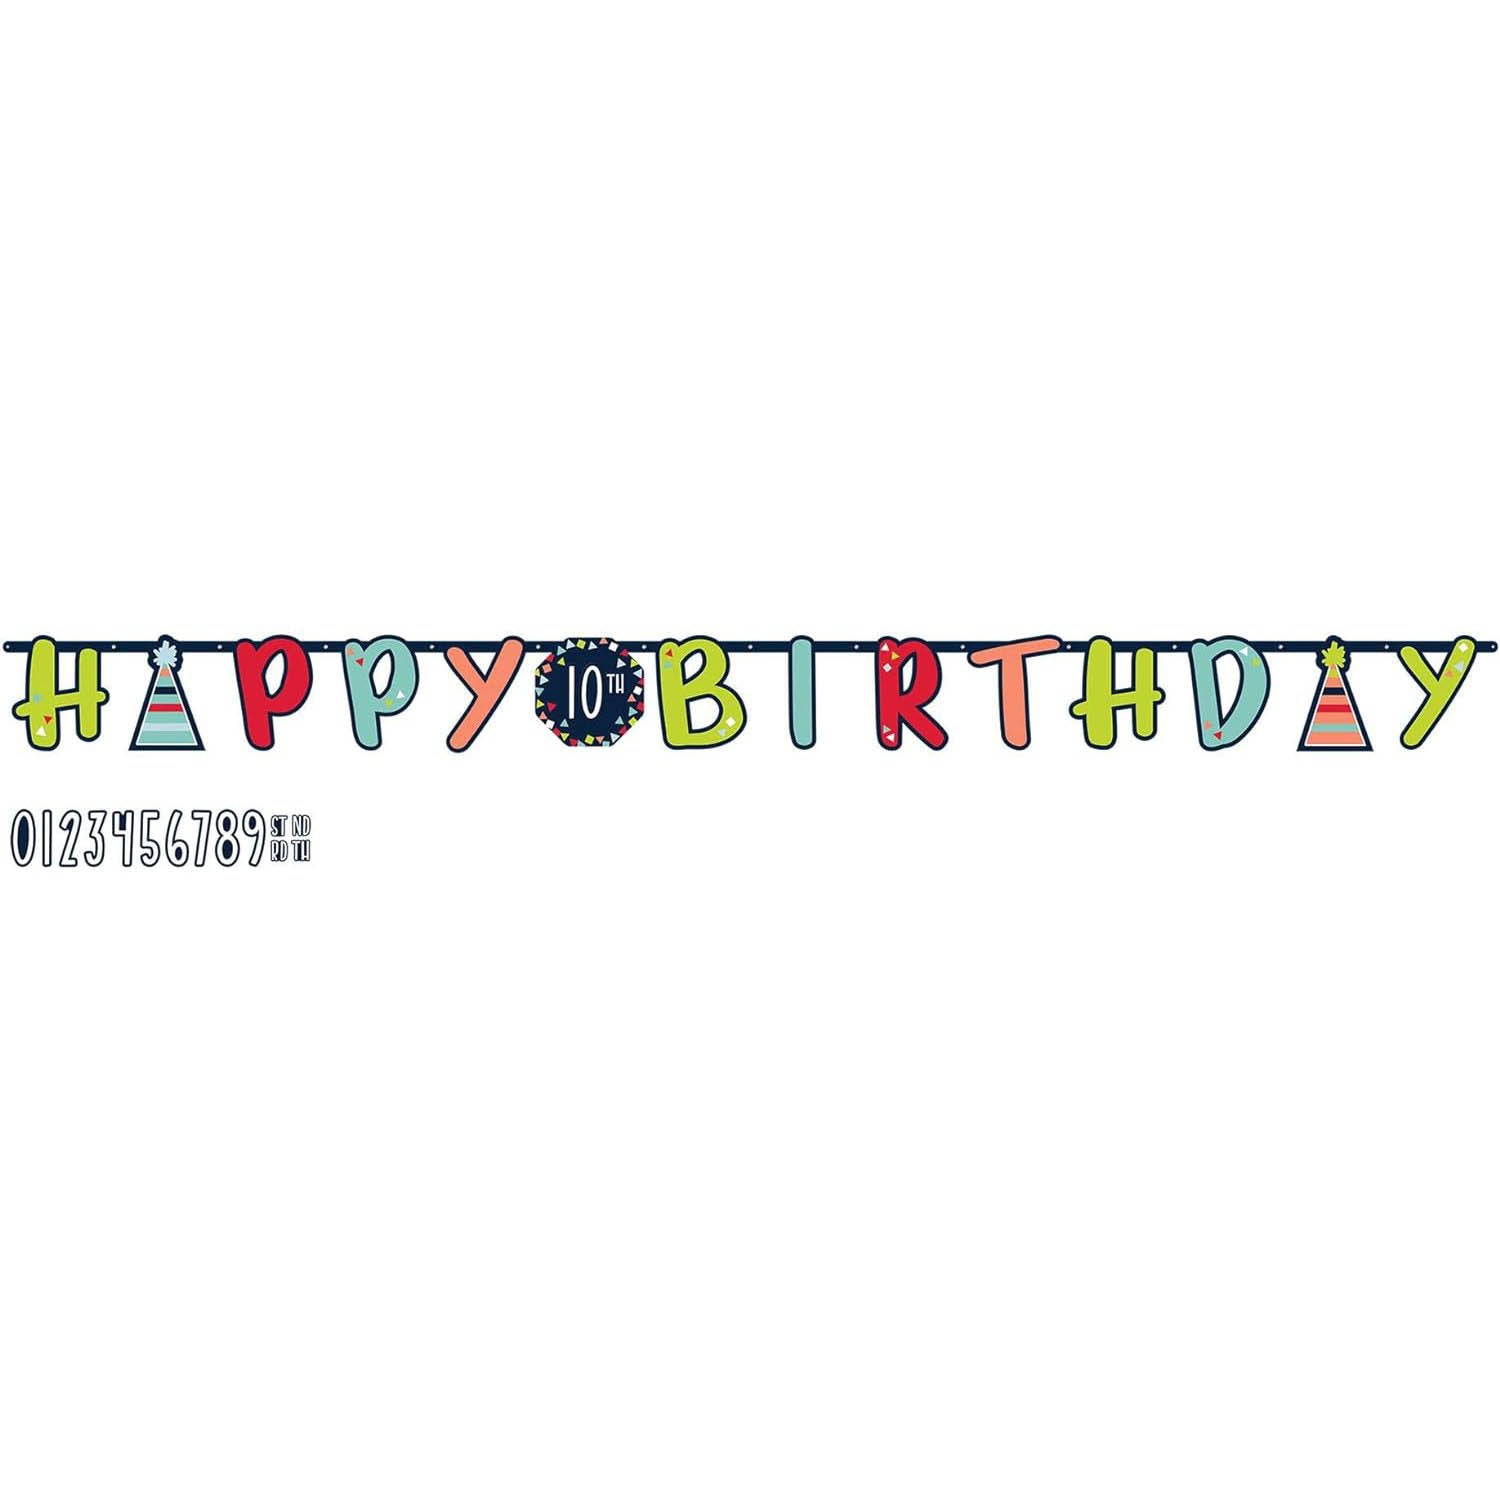 A Reason To Celebrate Jumbo Add-An-Age Letter Banner Paper 10.5ft